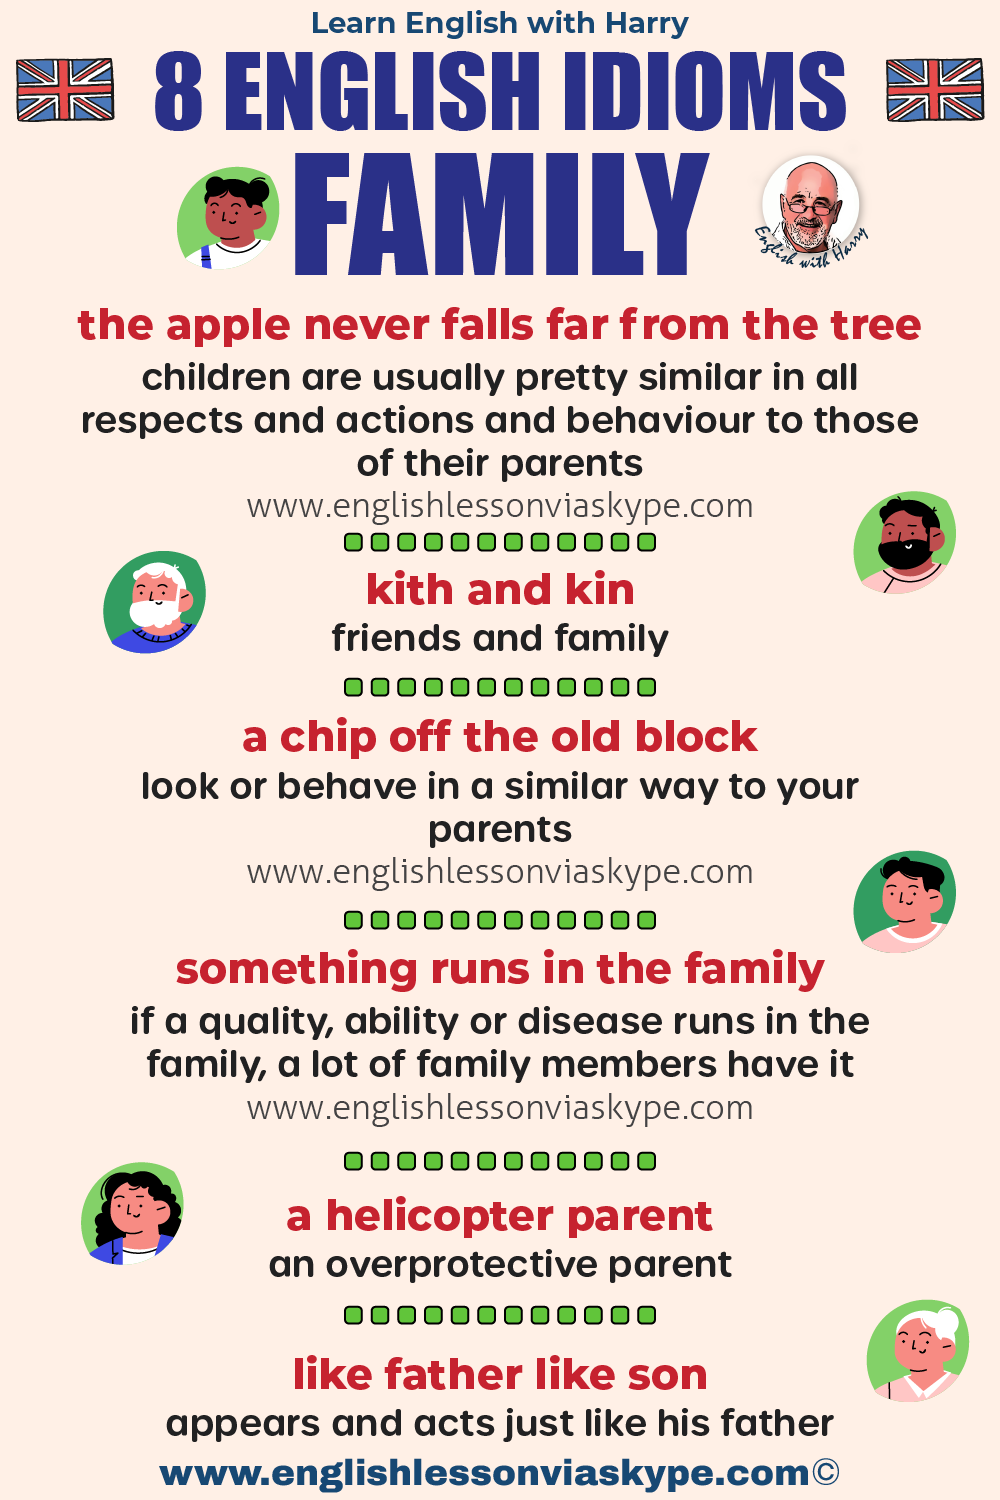 Learn family idioms in English. Advanced English learning. Online English lessons on Zoom at www.englishlessonviaskype.com #learnenglish #englishlessons #EnglishTeacher #vocabulary #ingles